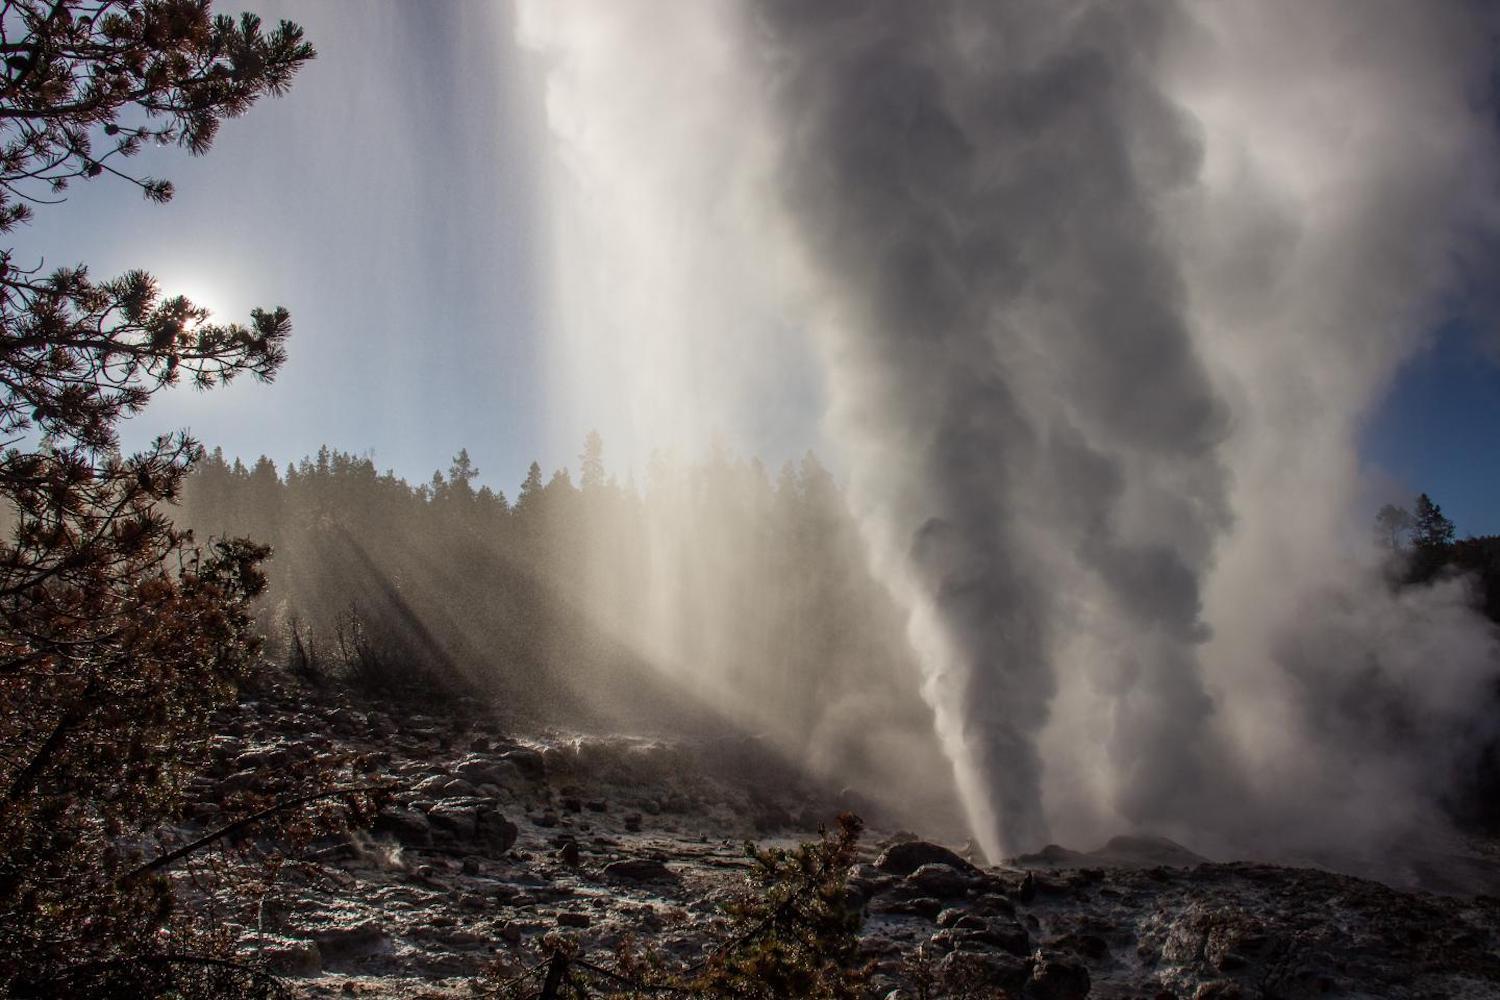 A 2019 eruption of Steamboat Geyser in the Norris Geyser Basin of Yellowstone National Park. The geyser's first documented activity was in 1878, and it has turned off and on sporadically since, once going for 50 years without erupting. In 2018 it reactiva